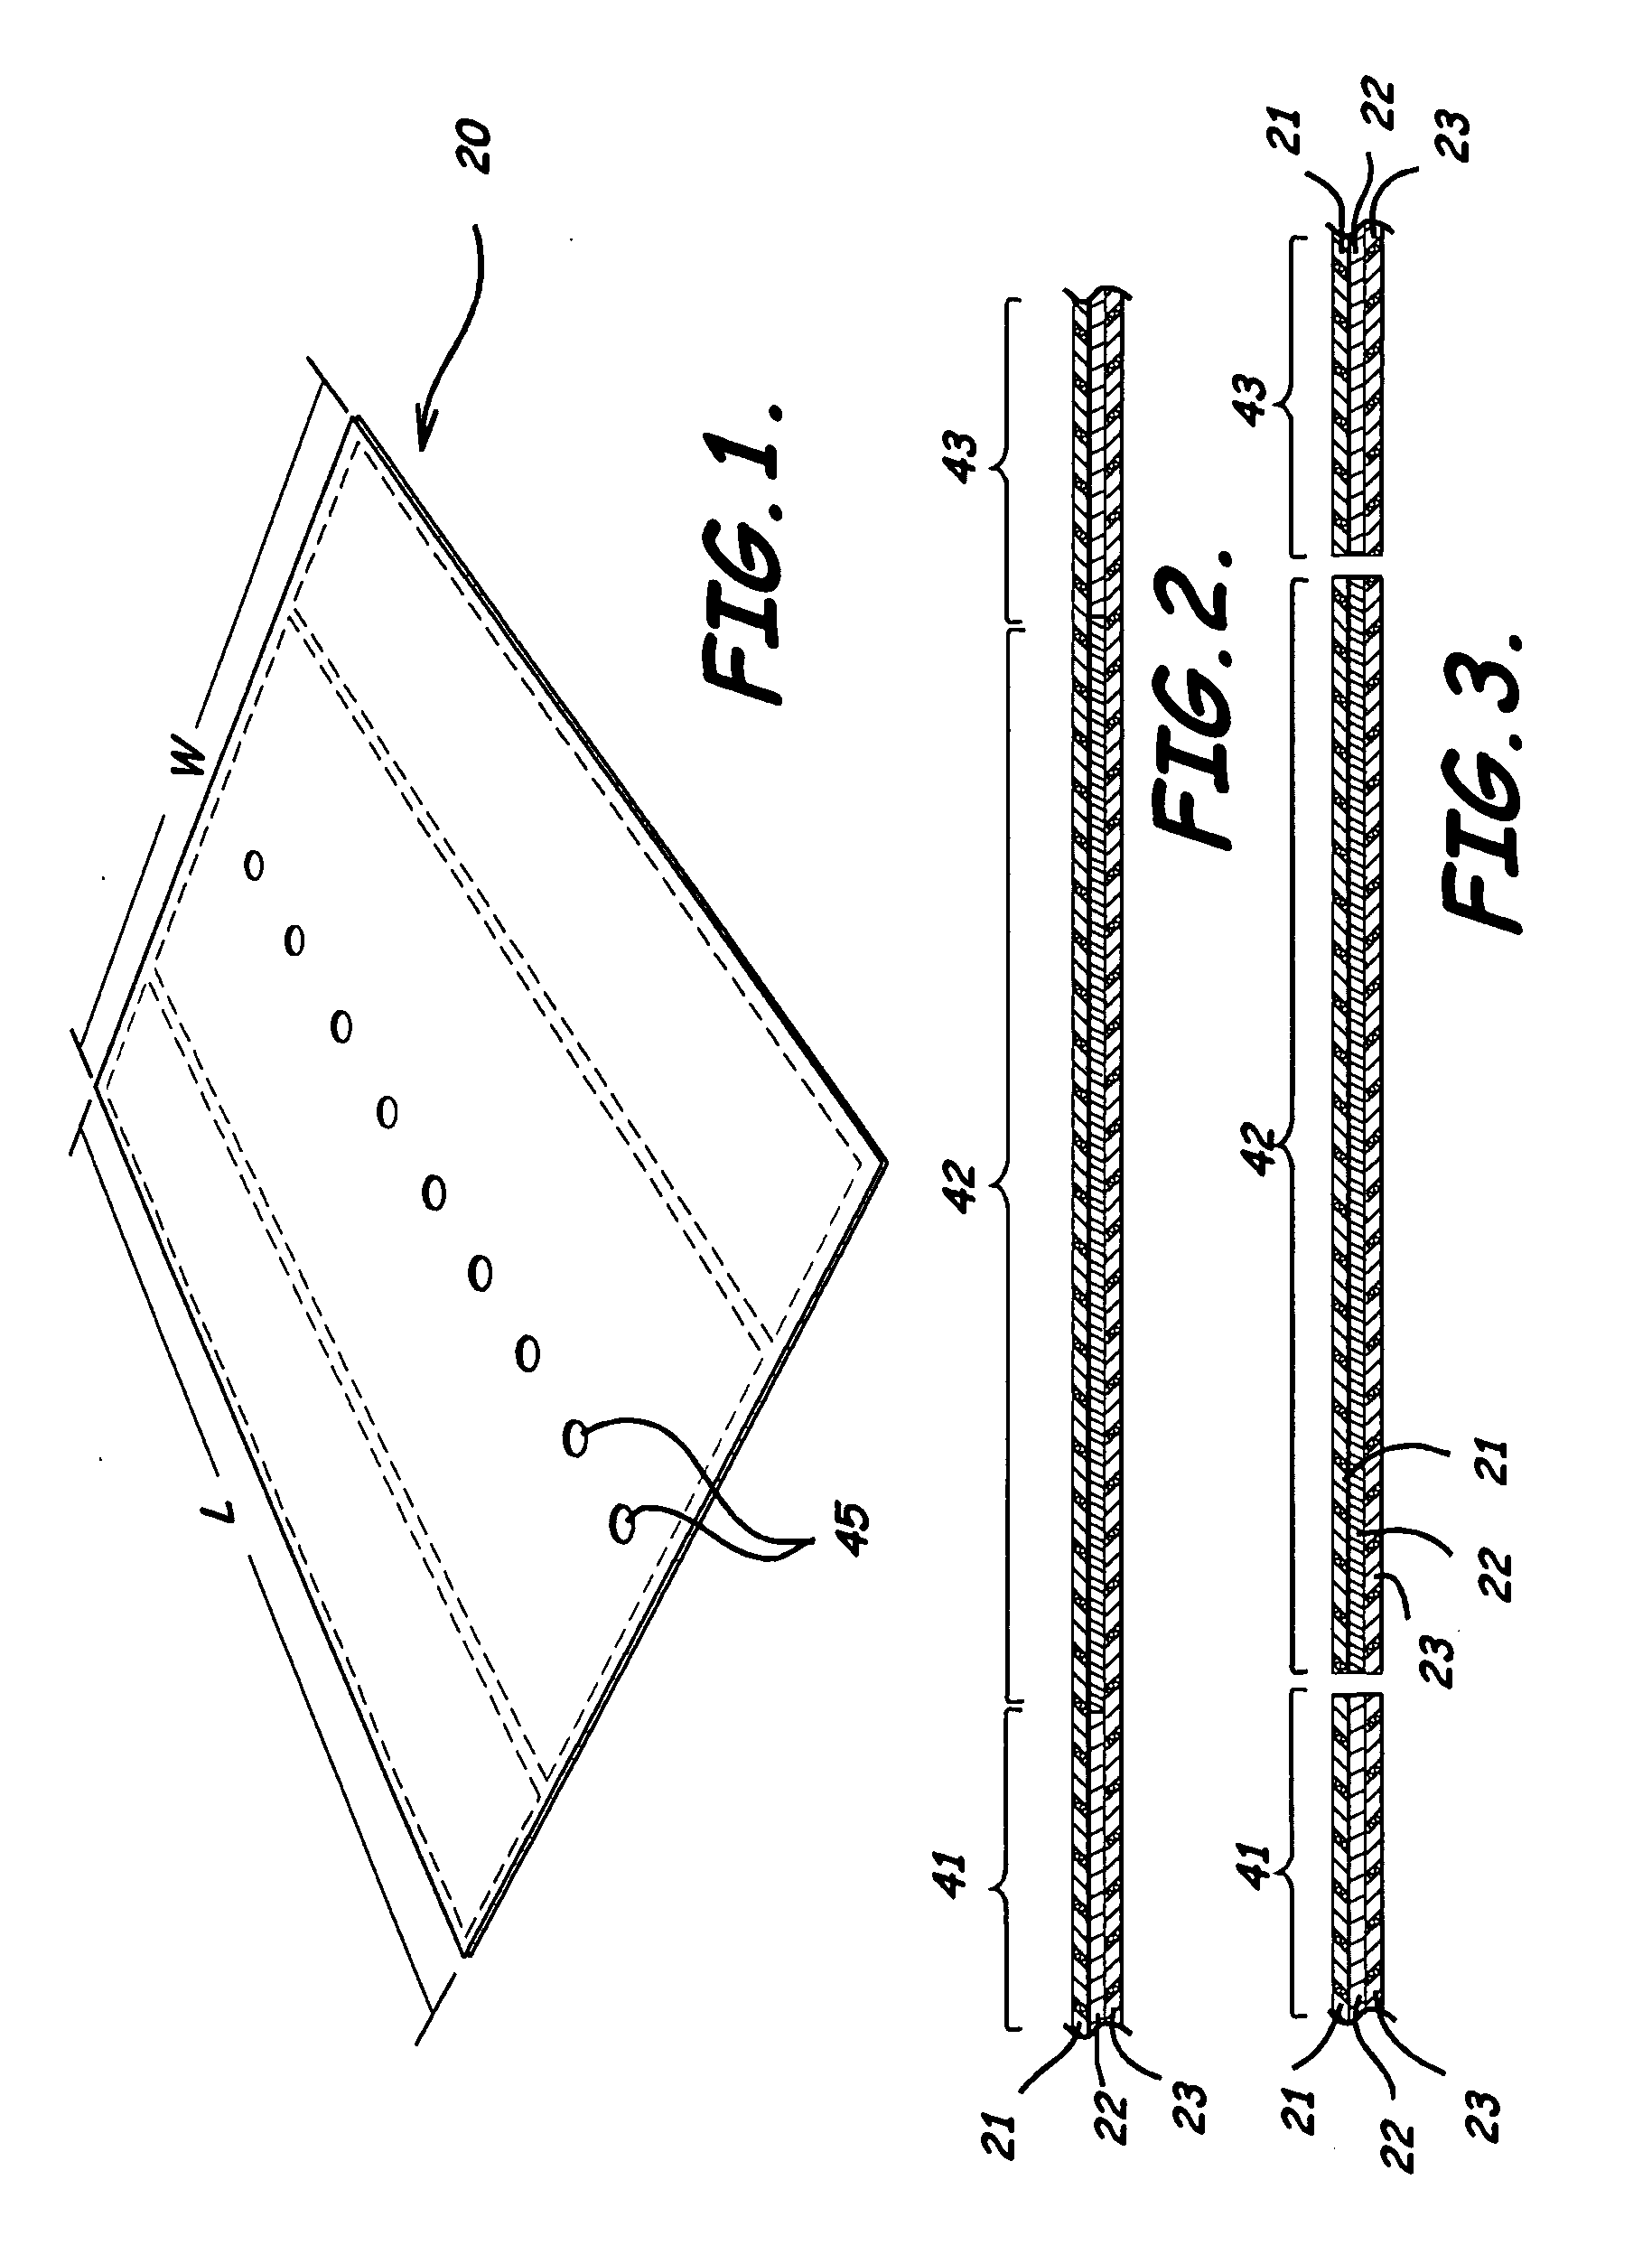 Microwave cooking package for food products and associated methods